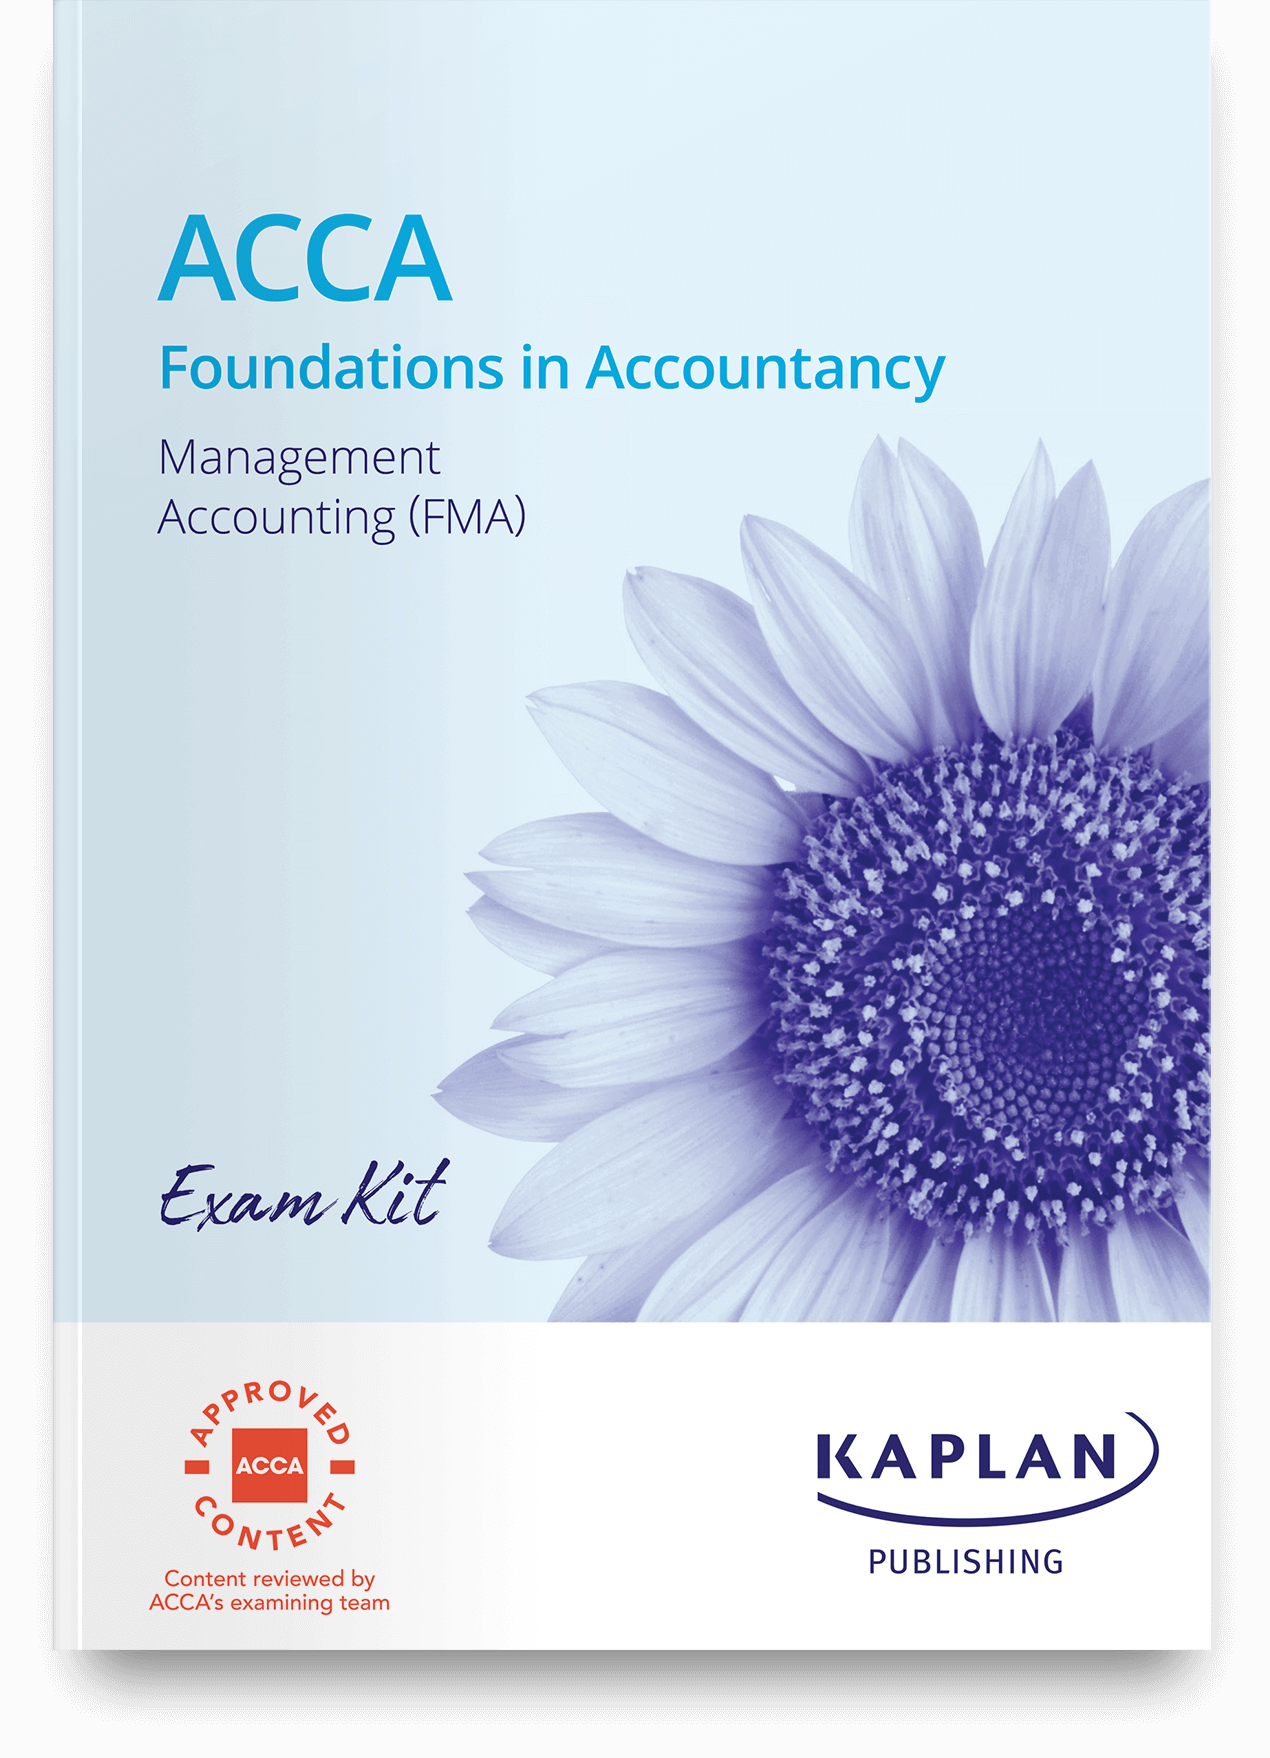 ACCA Foundations - Management Accounting (FMA) - Exam Kit